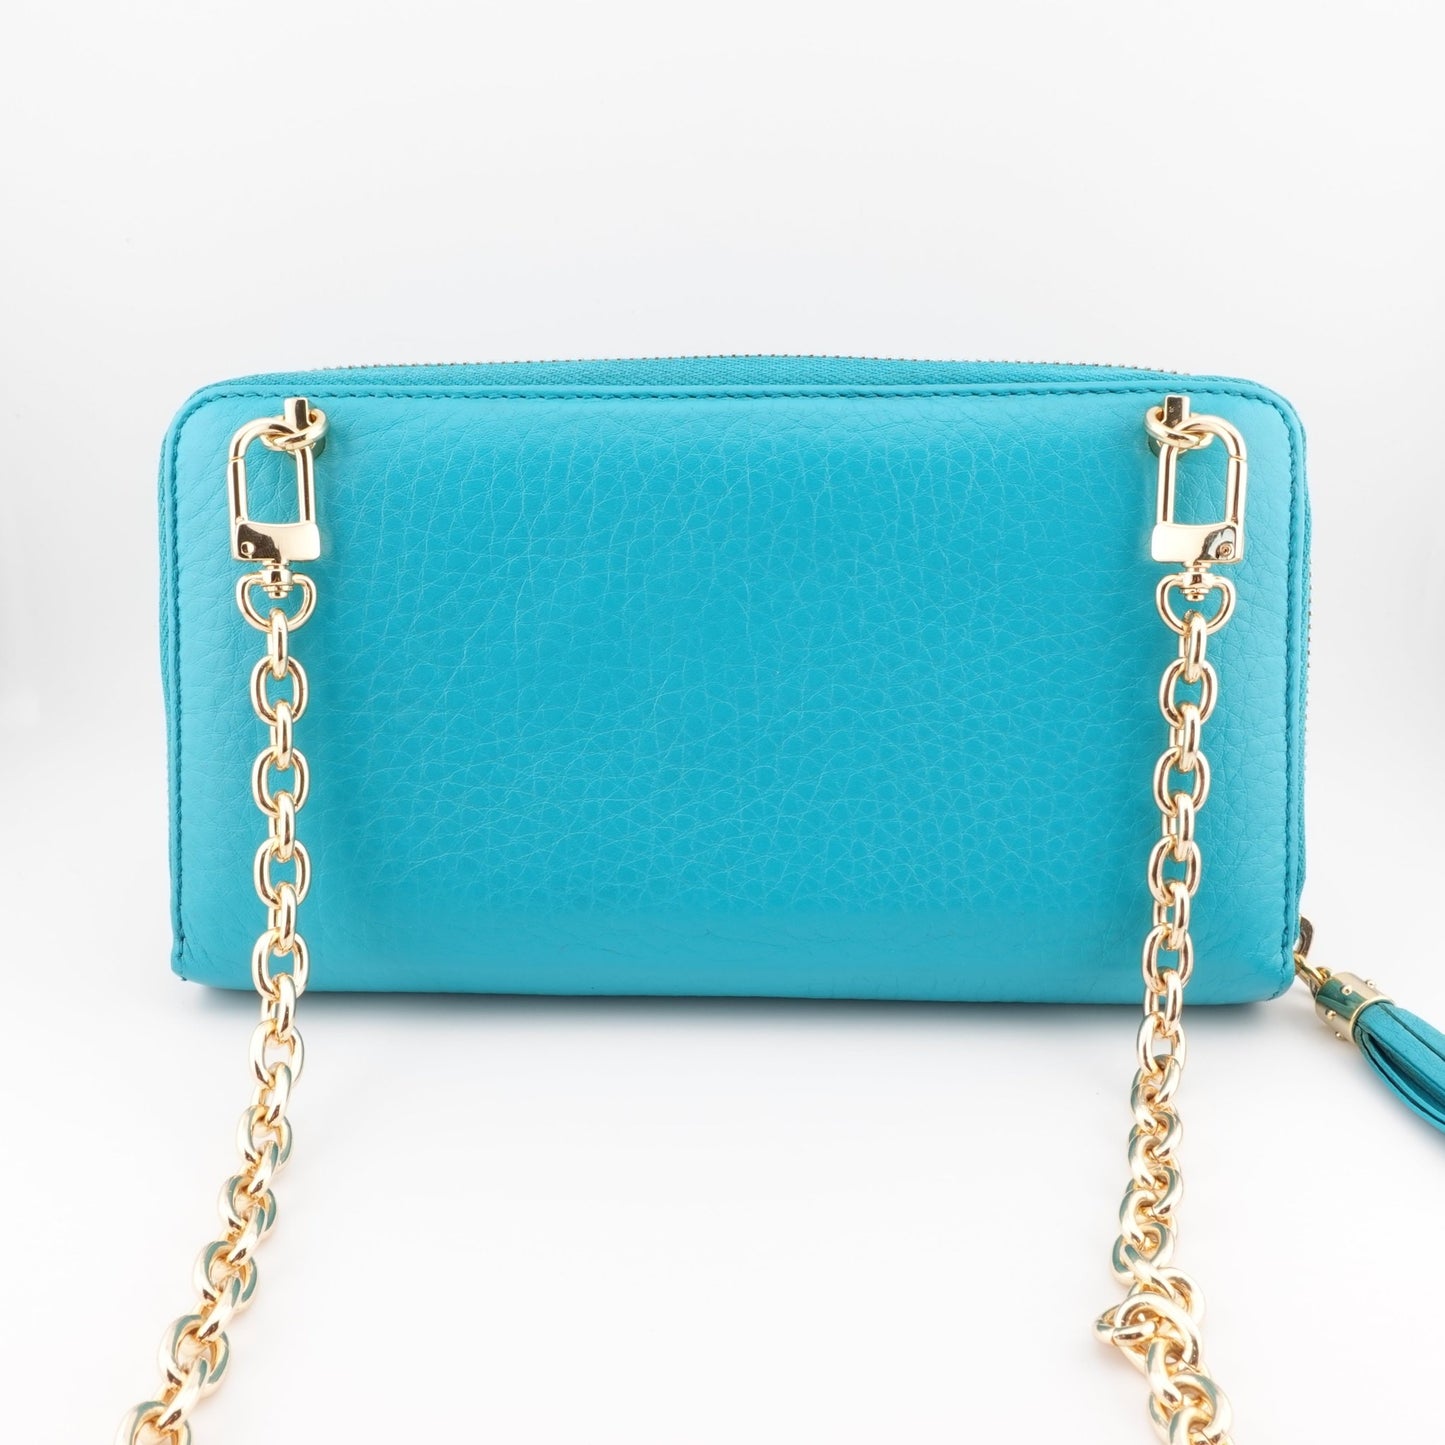 GUCCI Grained Leather Soho Zip Wallet On Chain - Bag Envy